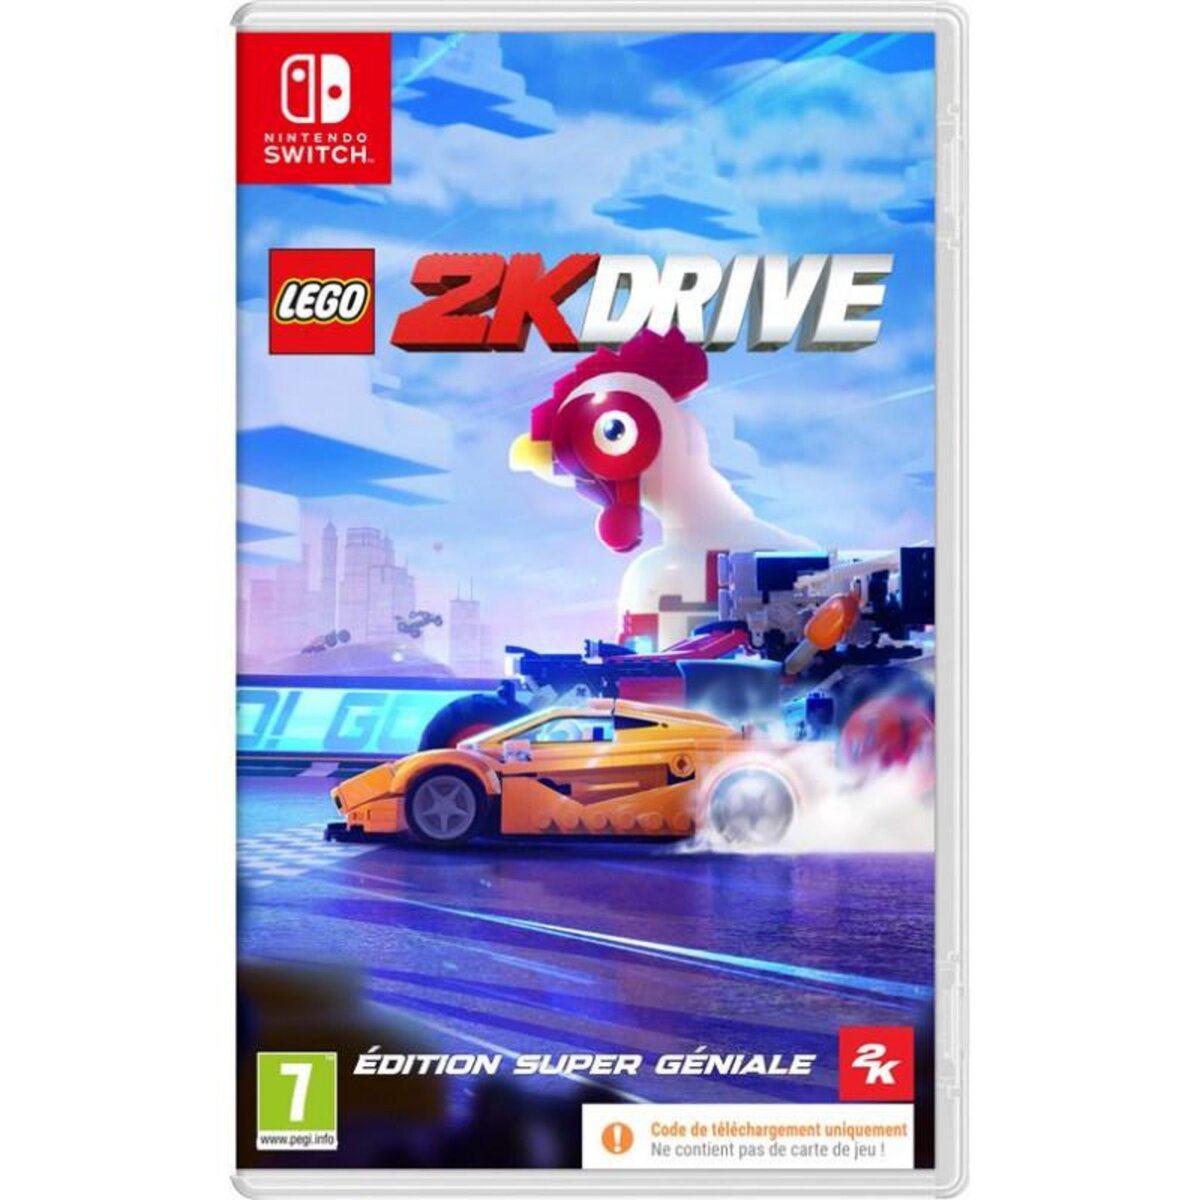 2K Games Lego® 2K Drive Edition Super Géniale Code in the box Nintendo Switch